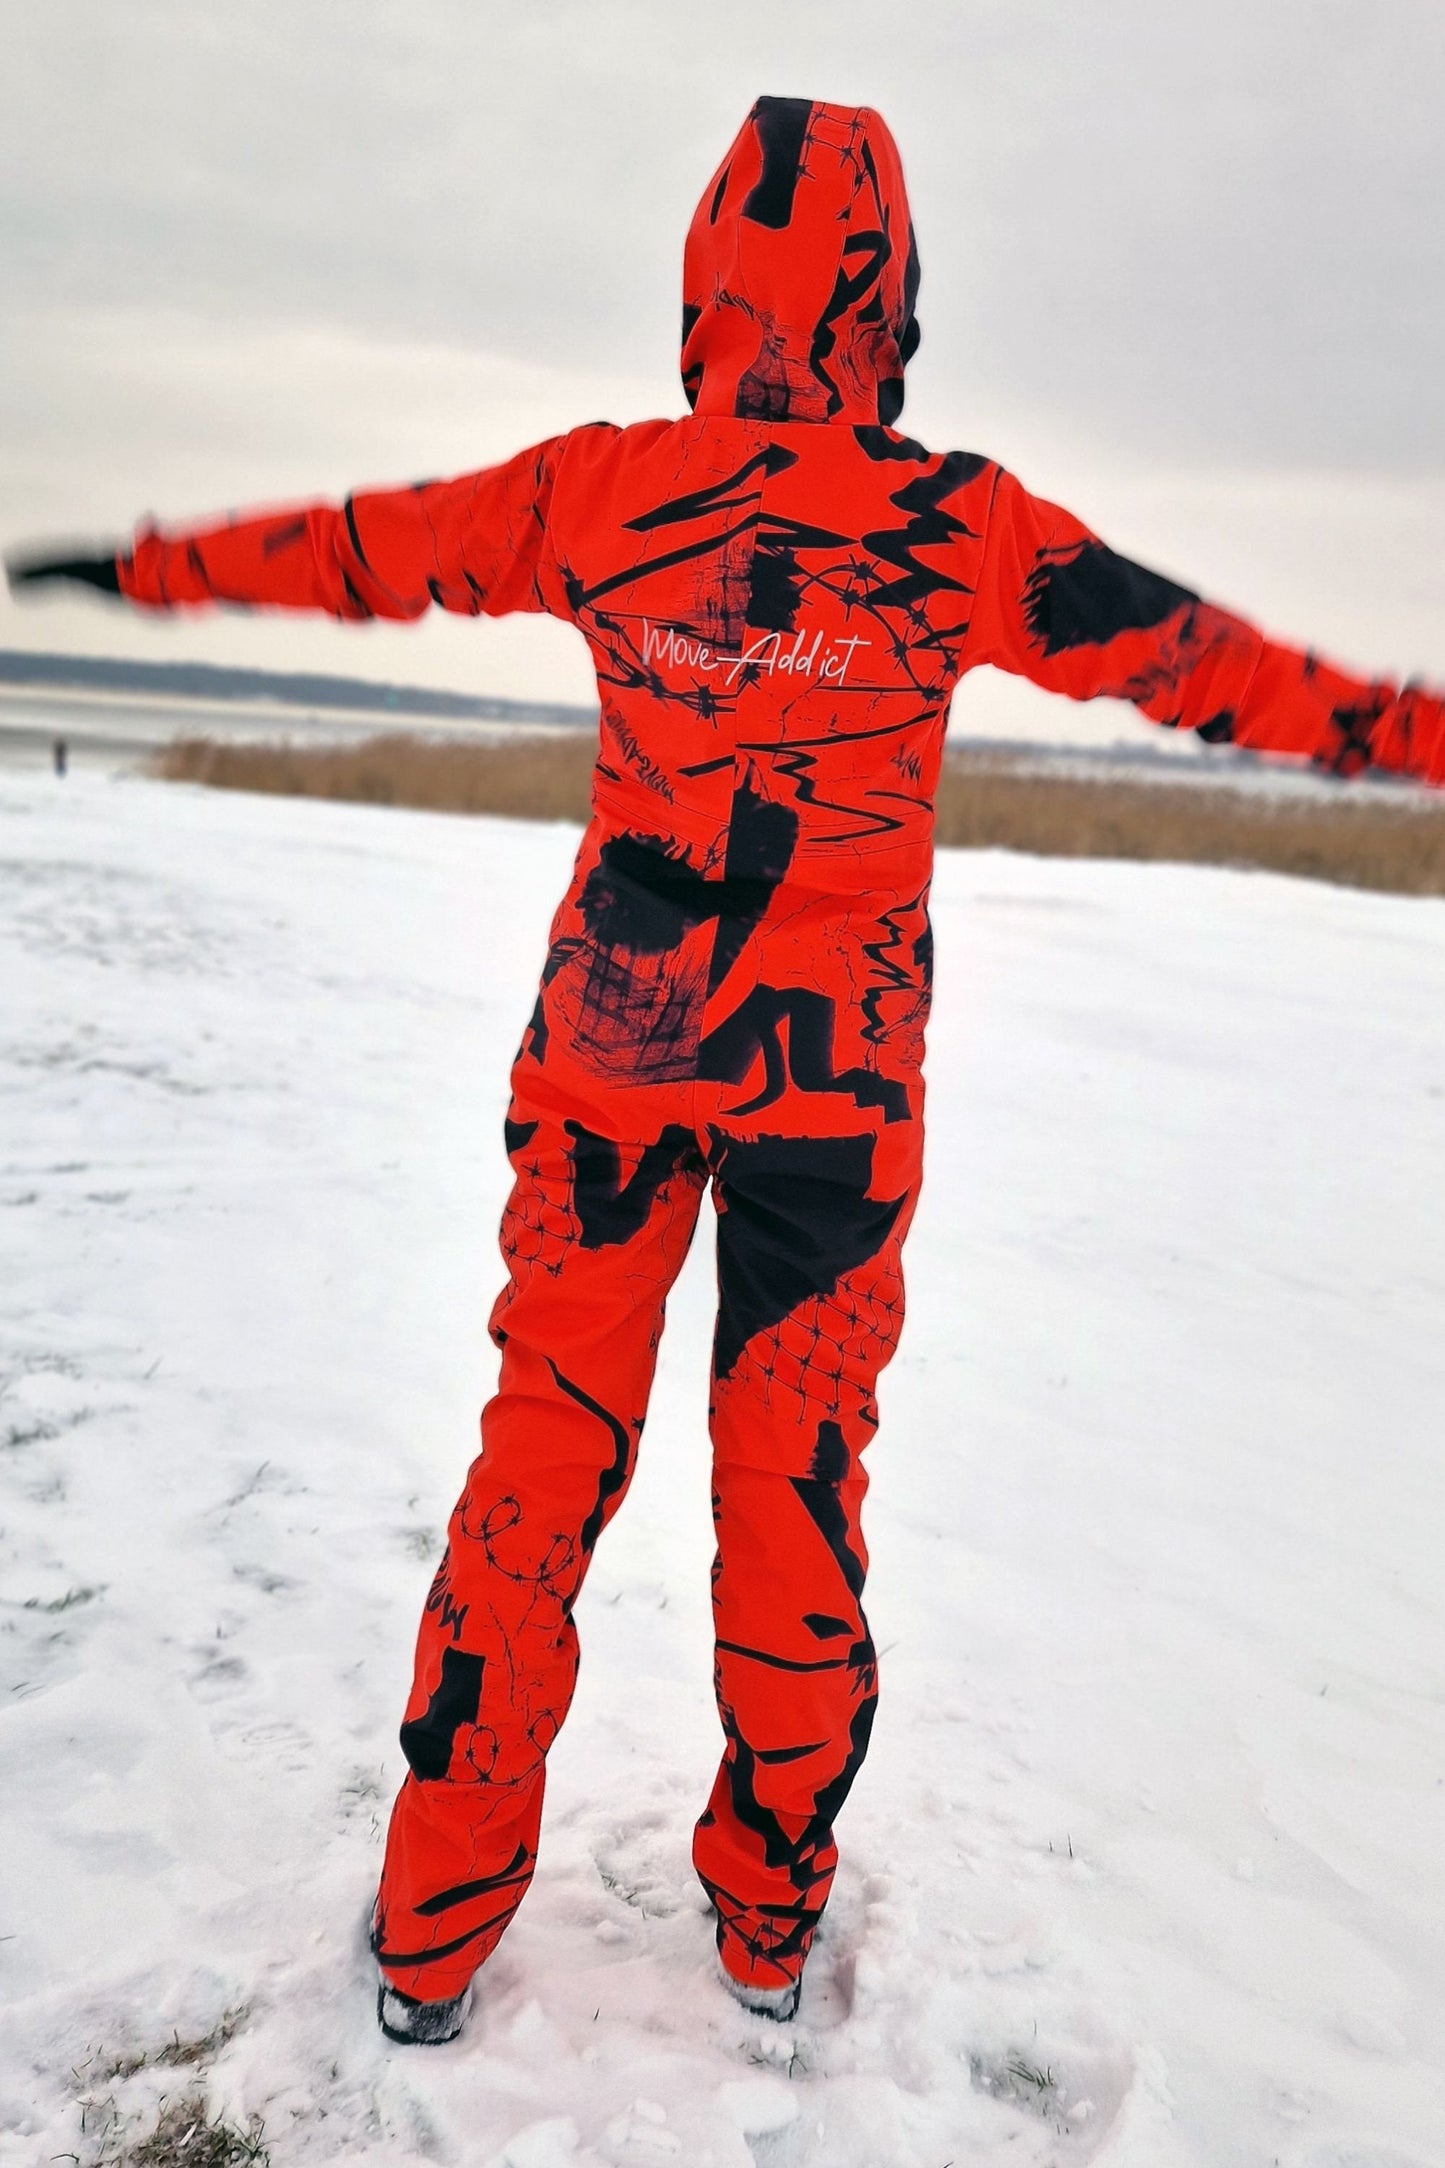 Red Winter Ski Jumpsuit, Snowboard Clothes, Snowboard suit, Skiing Overall, Ski Suit Women, Jumpsuit winter, Colorful Onesie